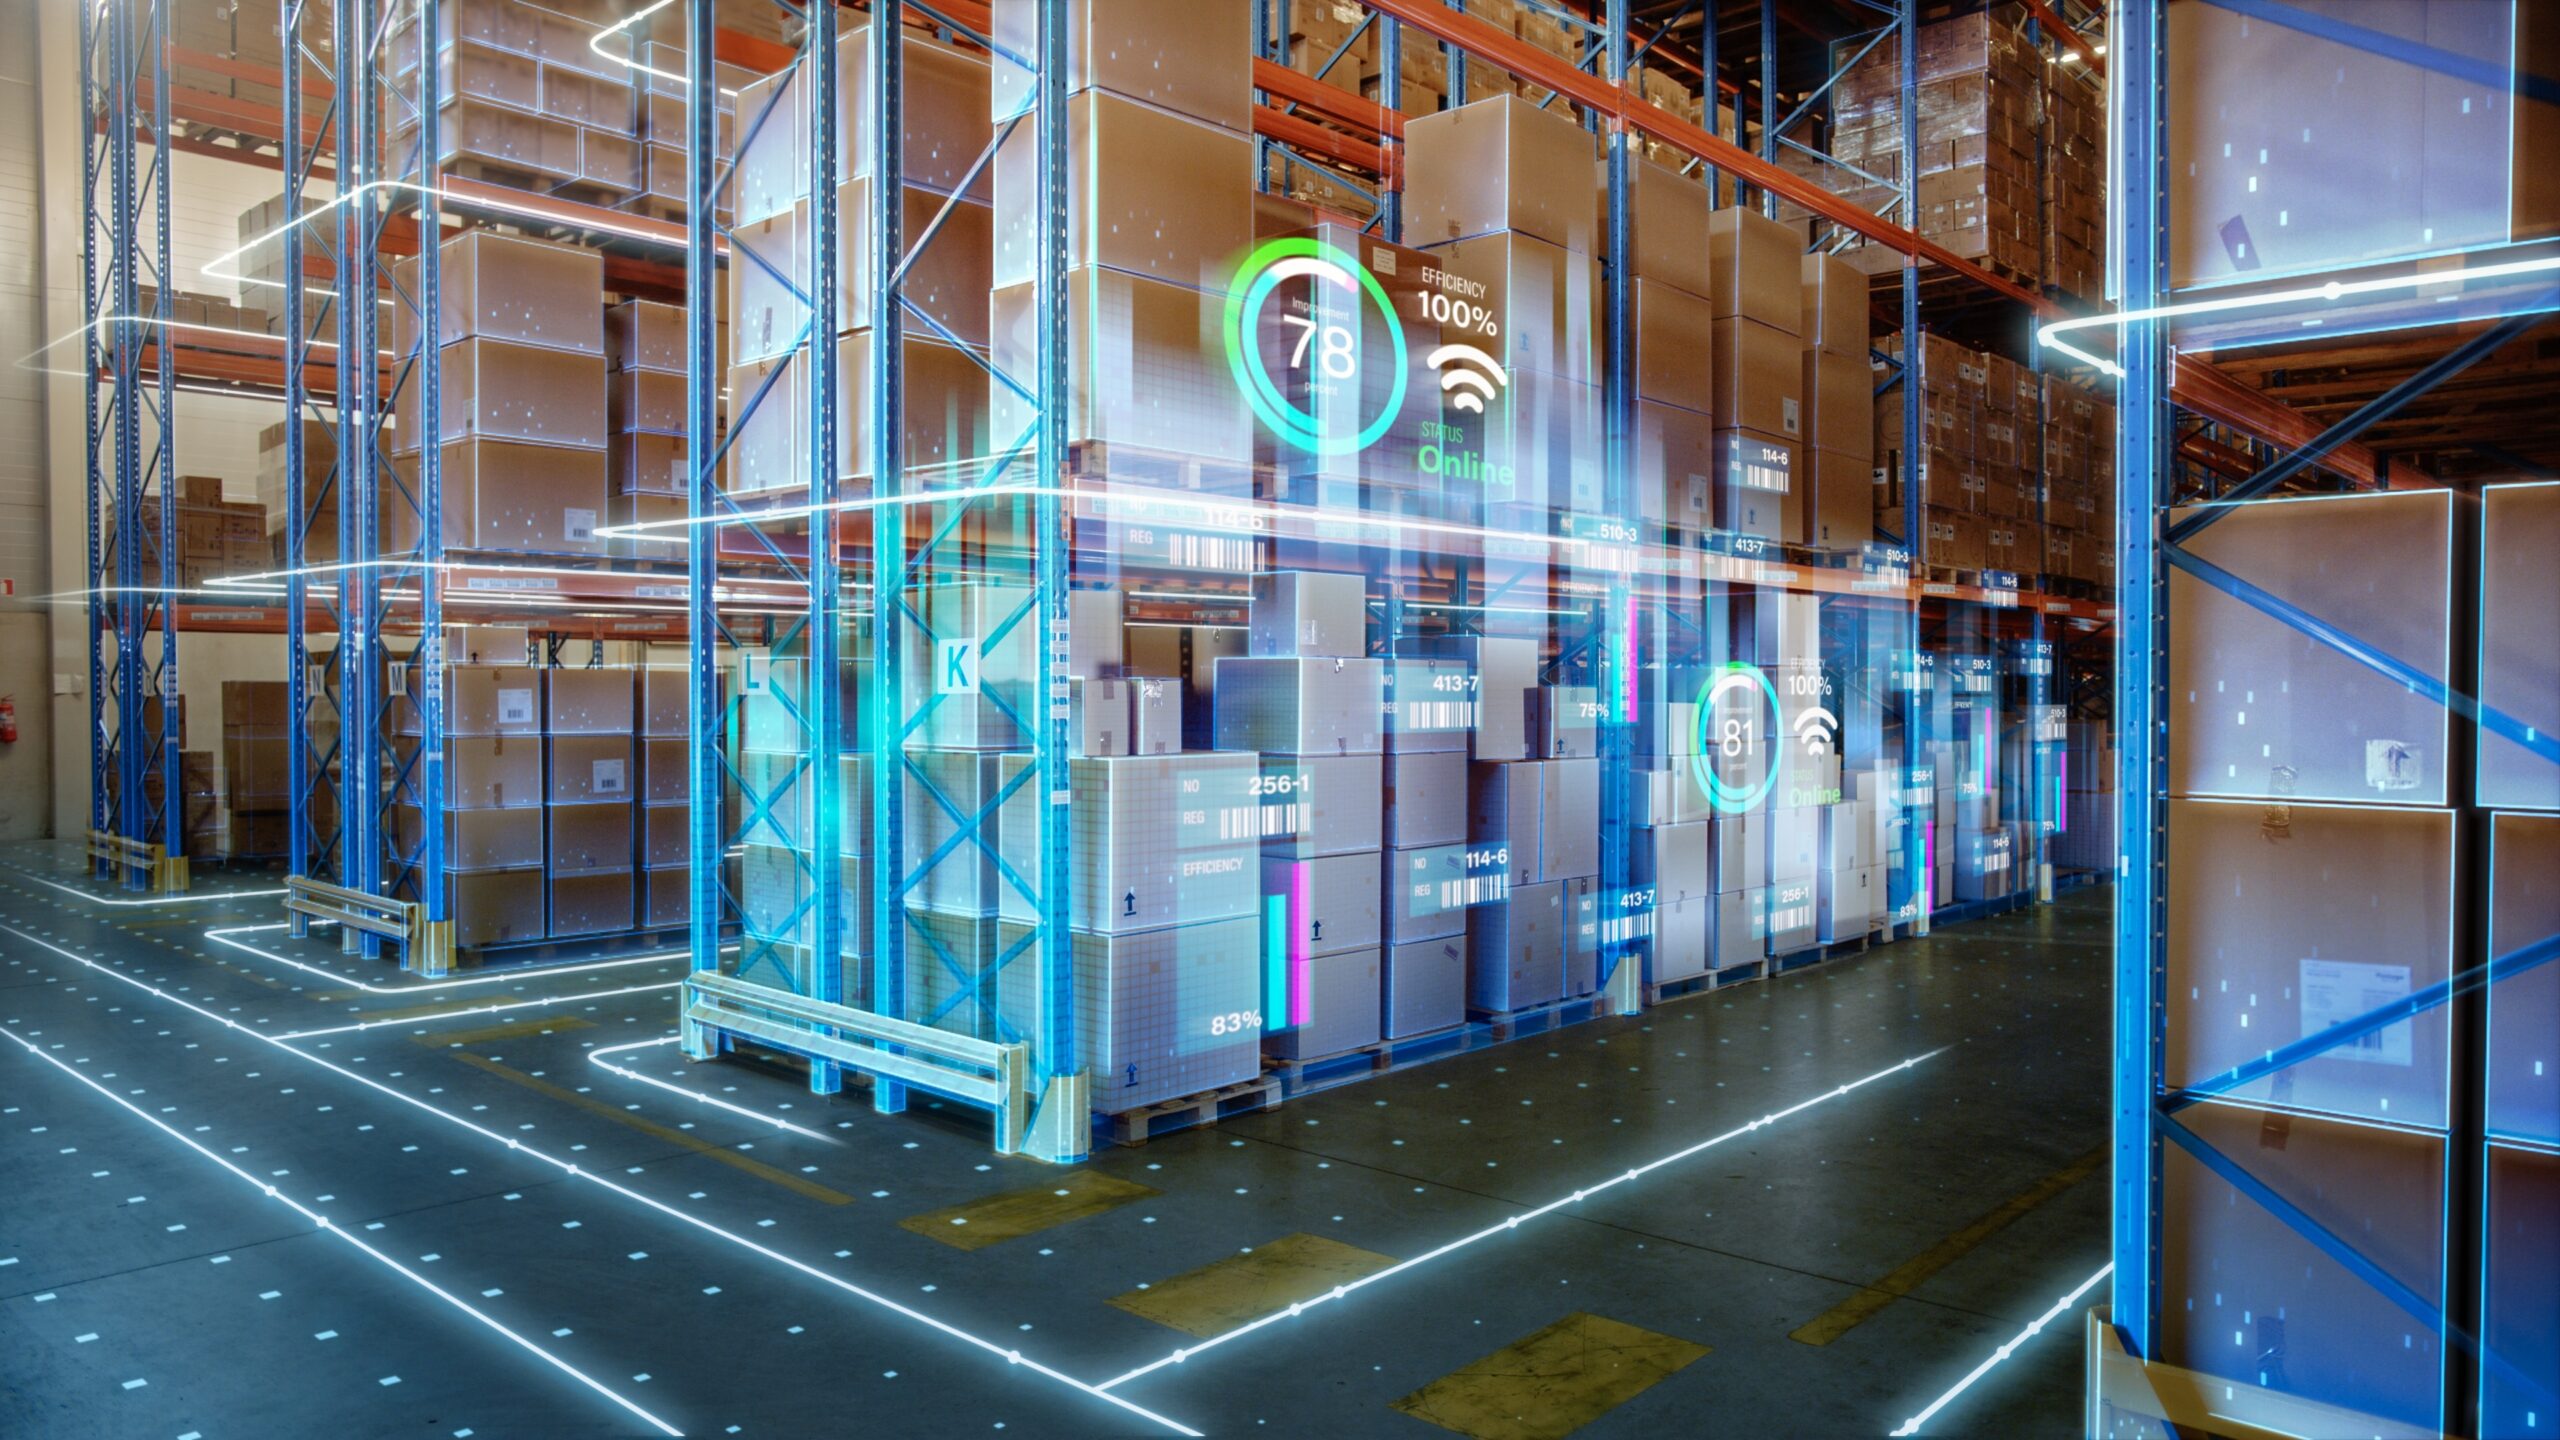 The Artificial Intelligence & Tech-enabled warehouse of a 3PL provider